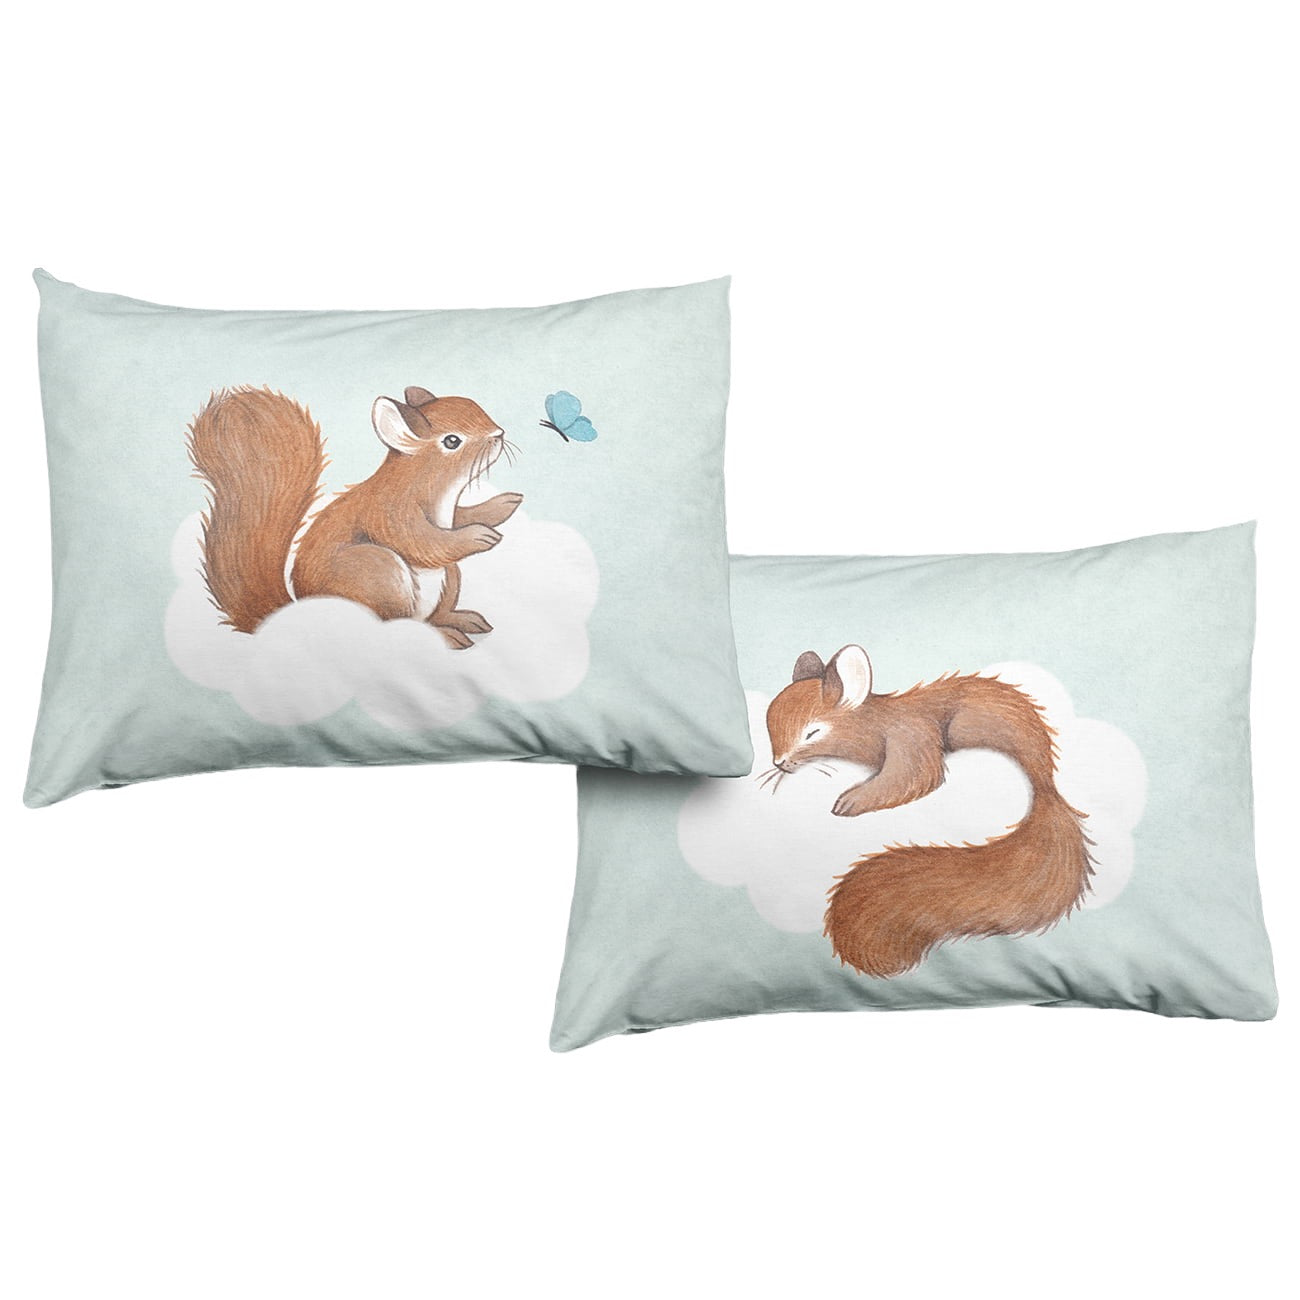 2-pack Enchanted Forest Standard Size Pillowcases